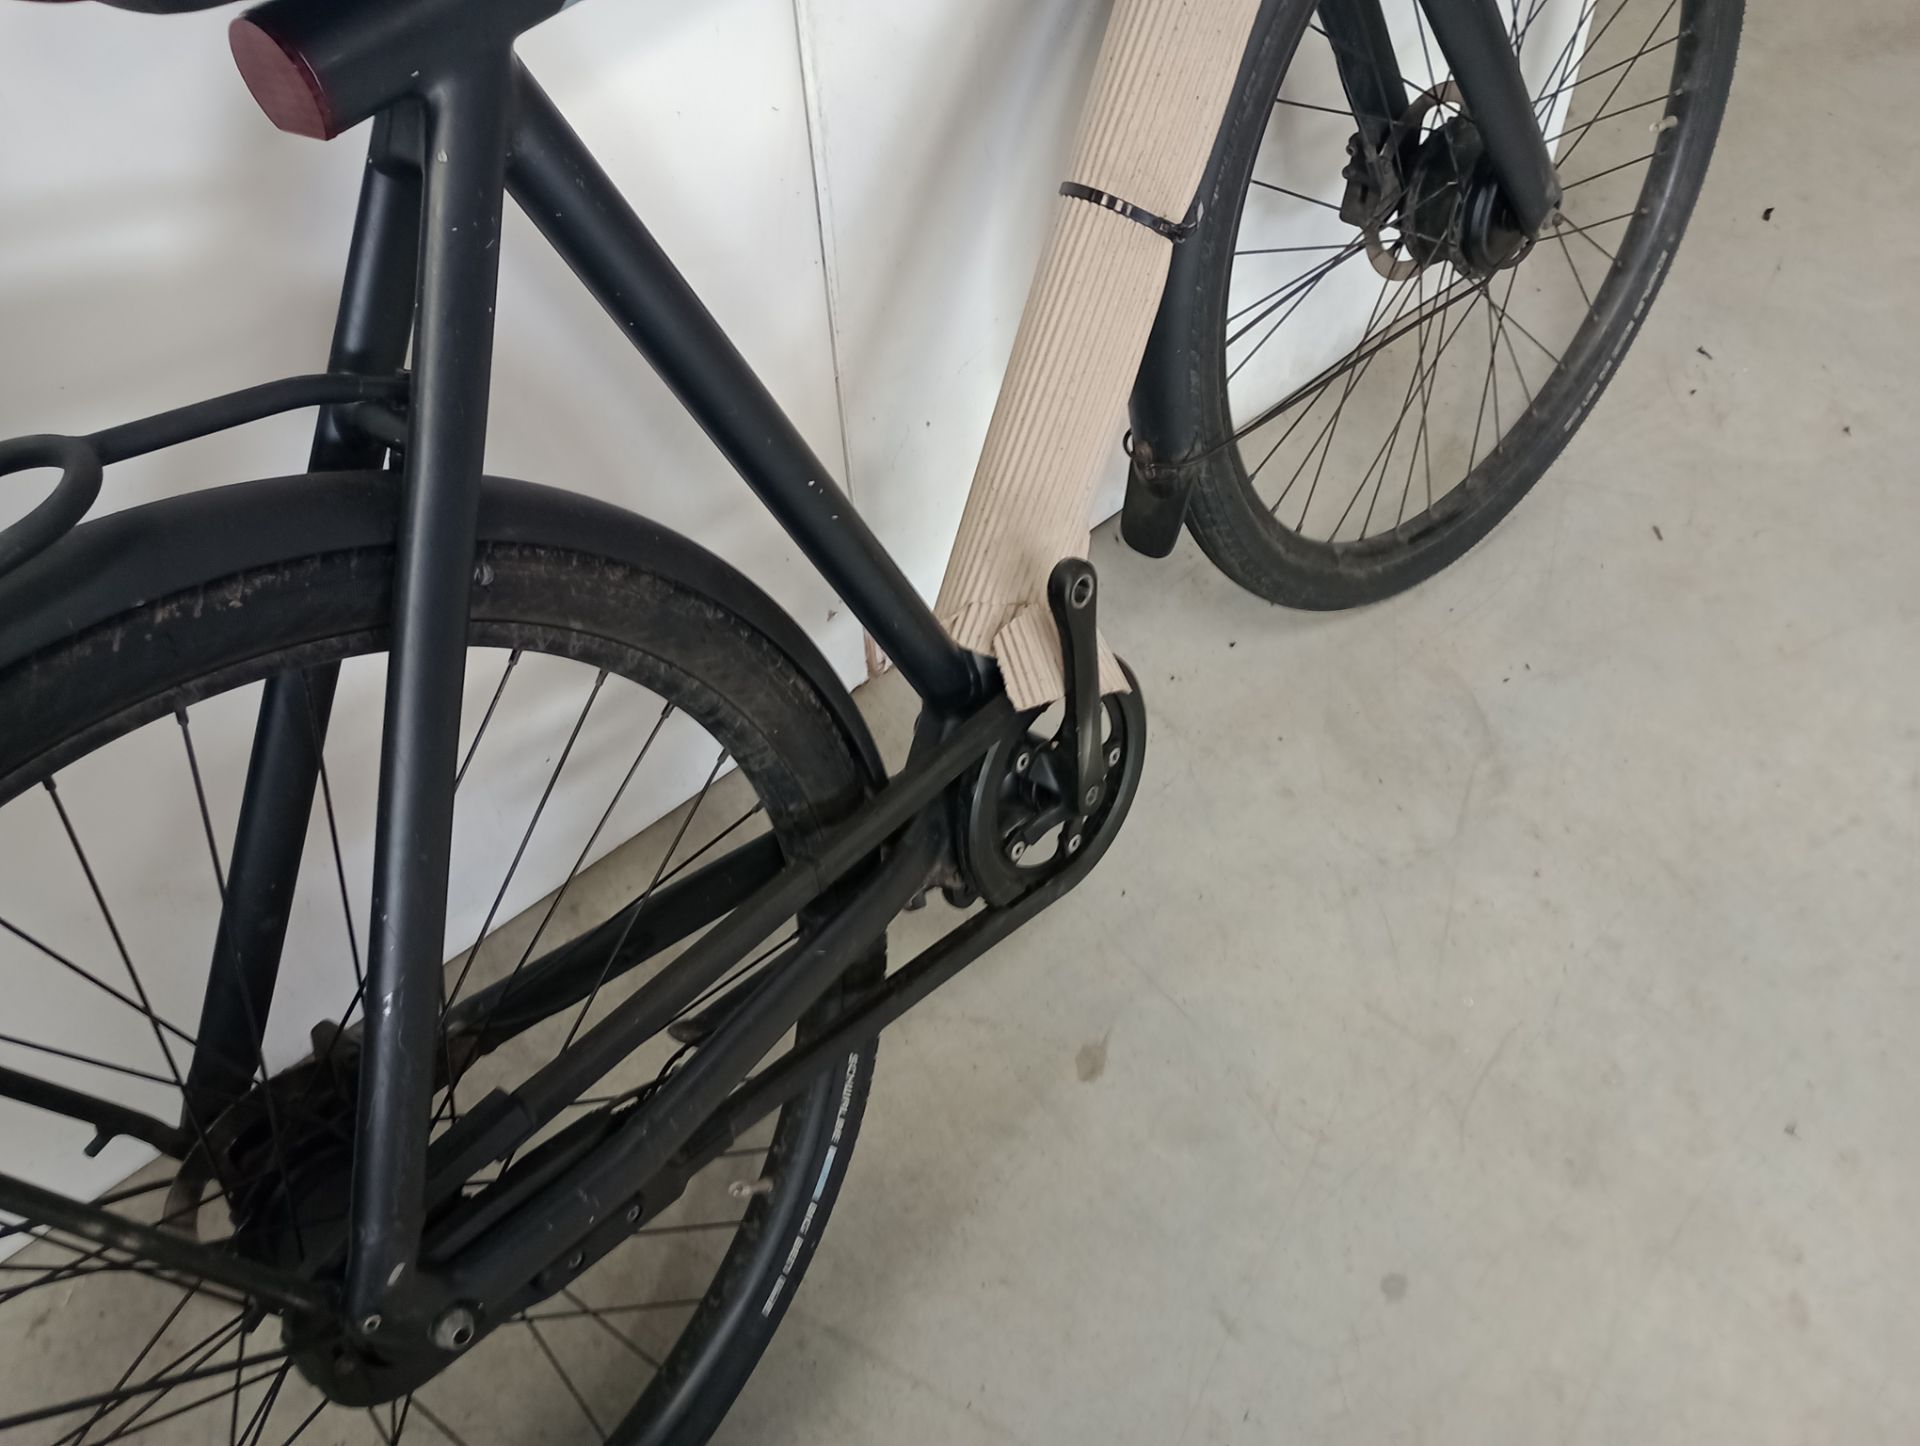 VanMoof S3 Electric Bike, Frame Number ASY1035020 (NOT ROADWORTHY - FOR SPARES ONLY) (No codes - Image 2 of 3